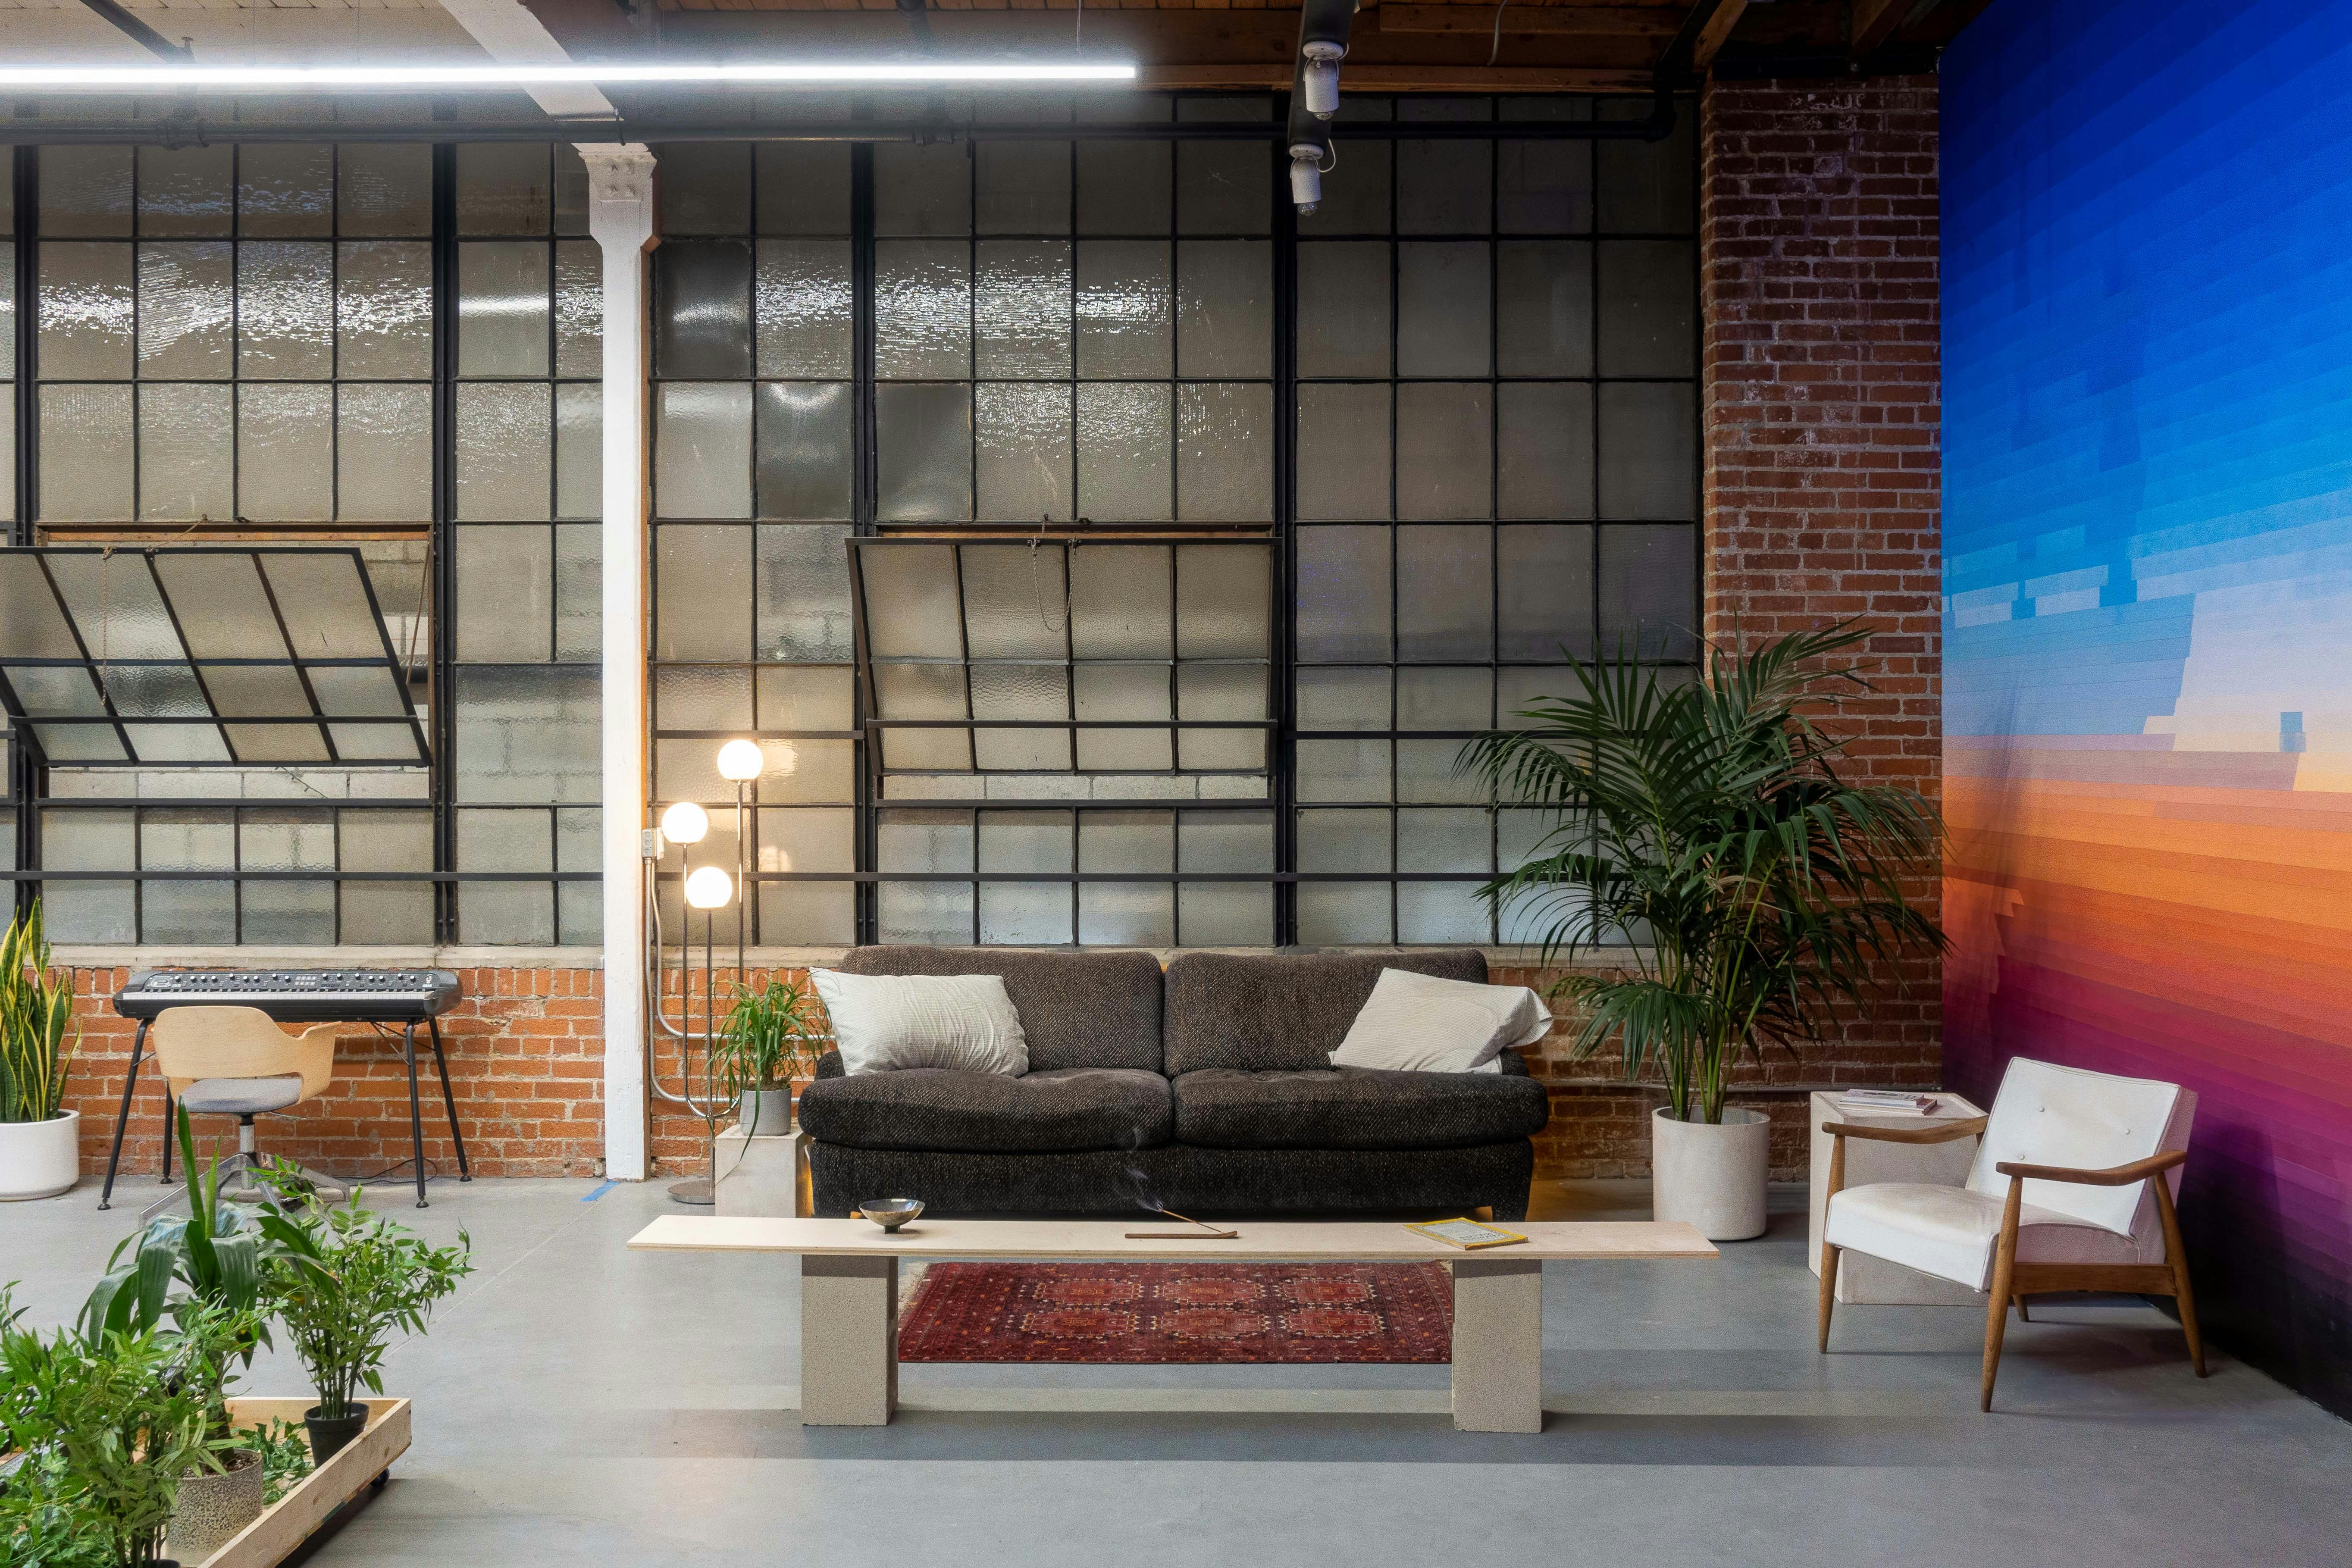 A tastefully decorated warehouse studio